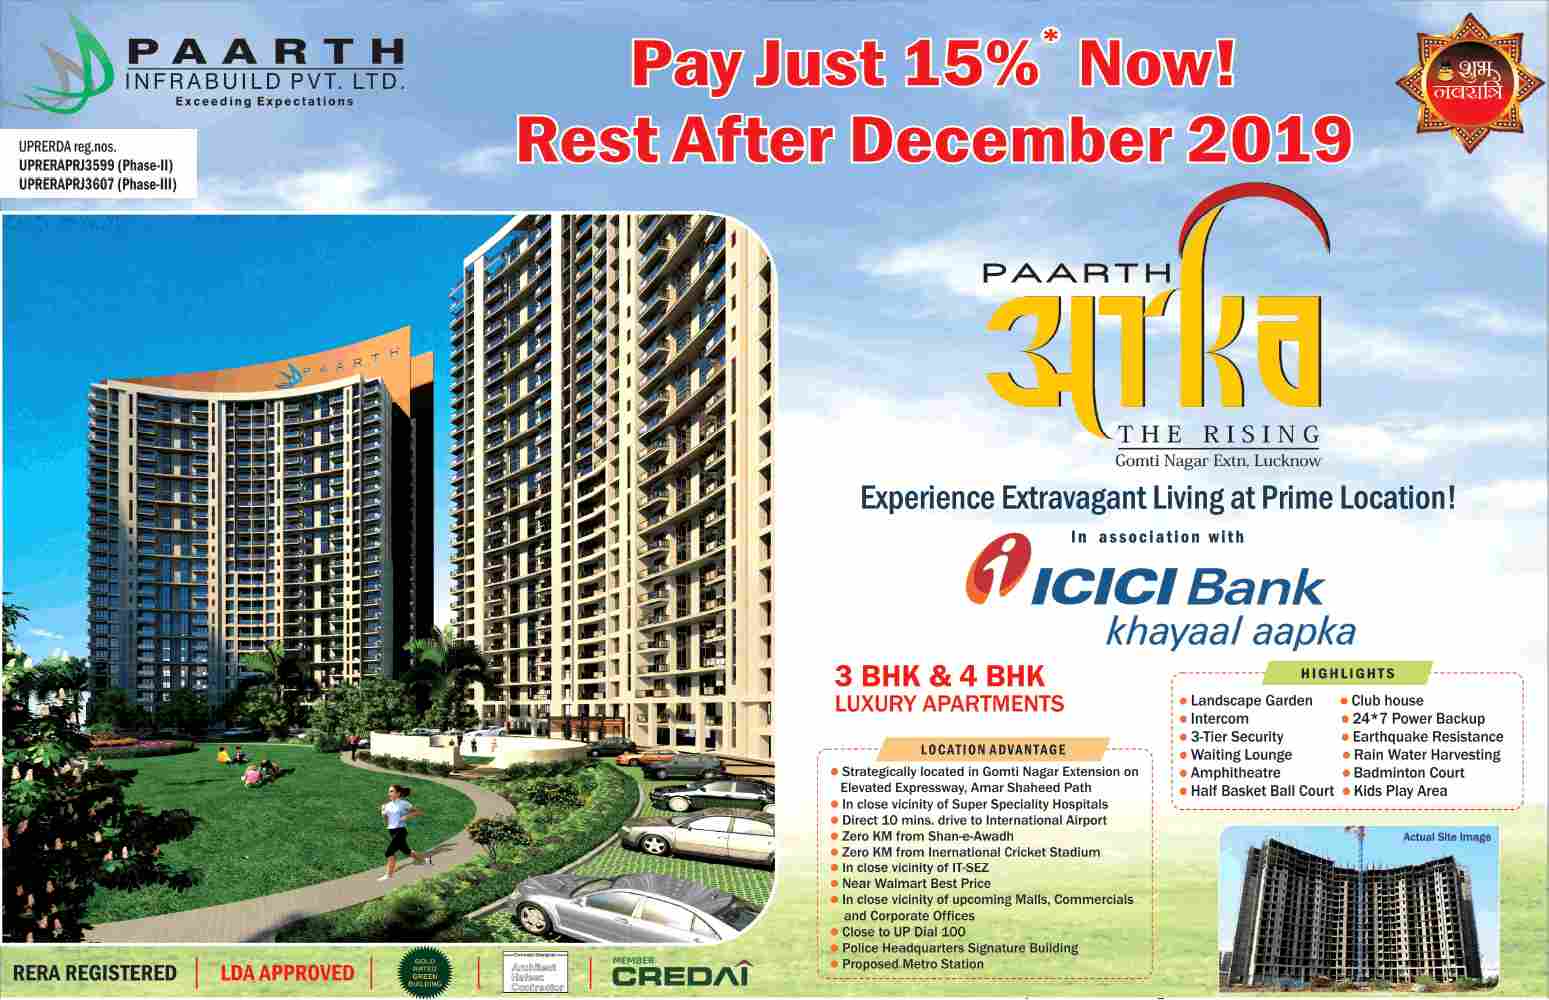 Pay just 15% now and rest after December 2019 at Paarth Arka in Lucknow Update